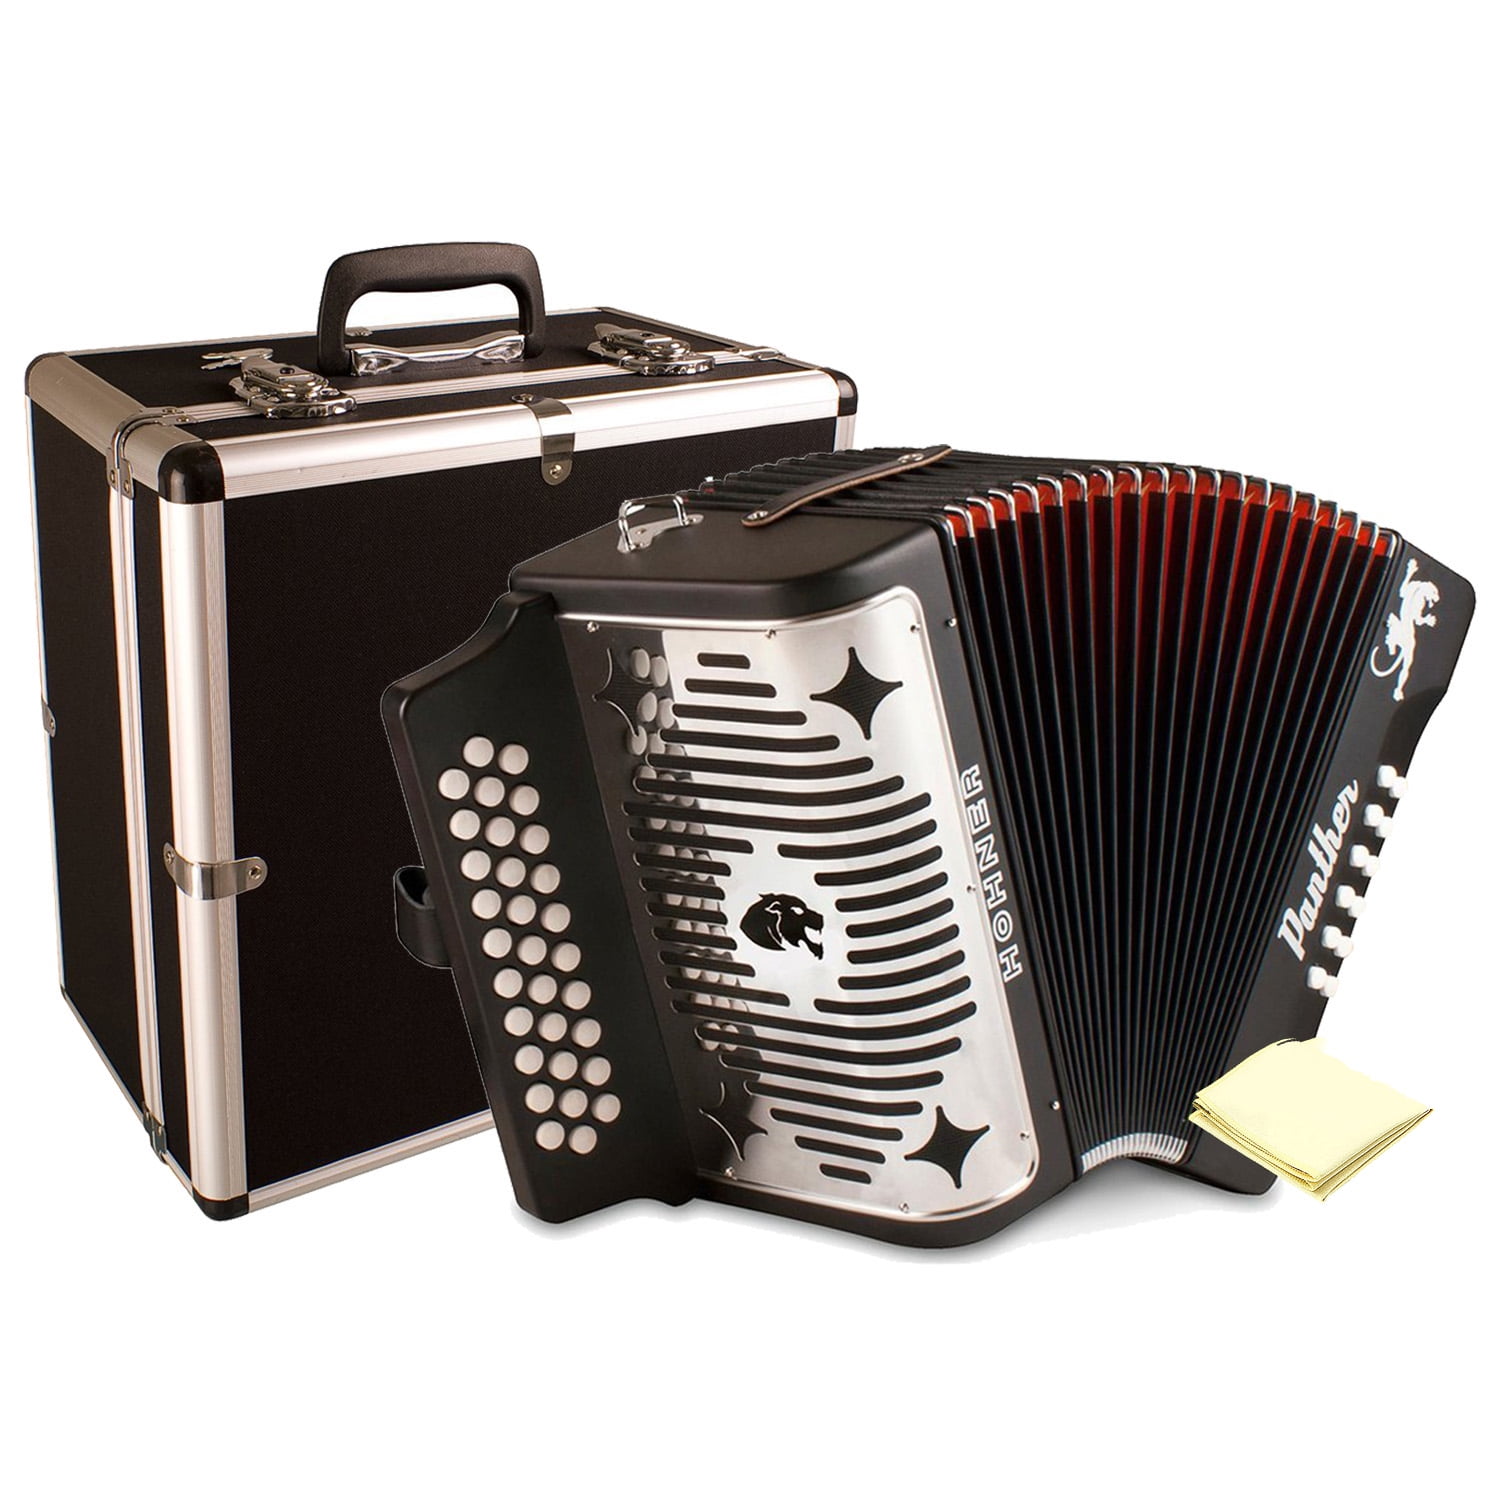 Hohner 3100gb Panther Diatonic Button Accordion In The Key Of G Inblack Finish With Hardshell Accordion Case And Accordion Polishing Cloth